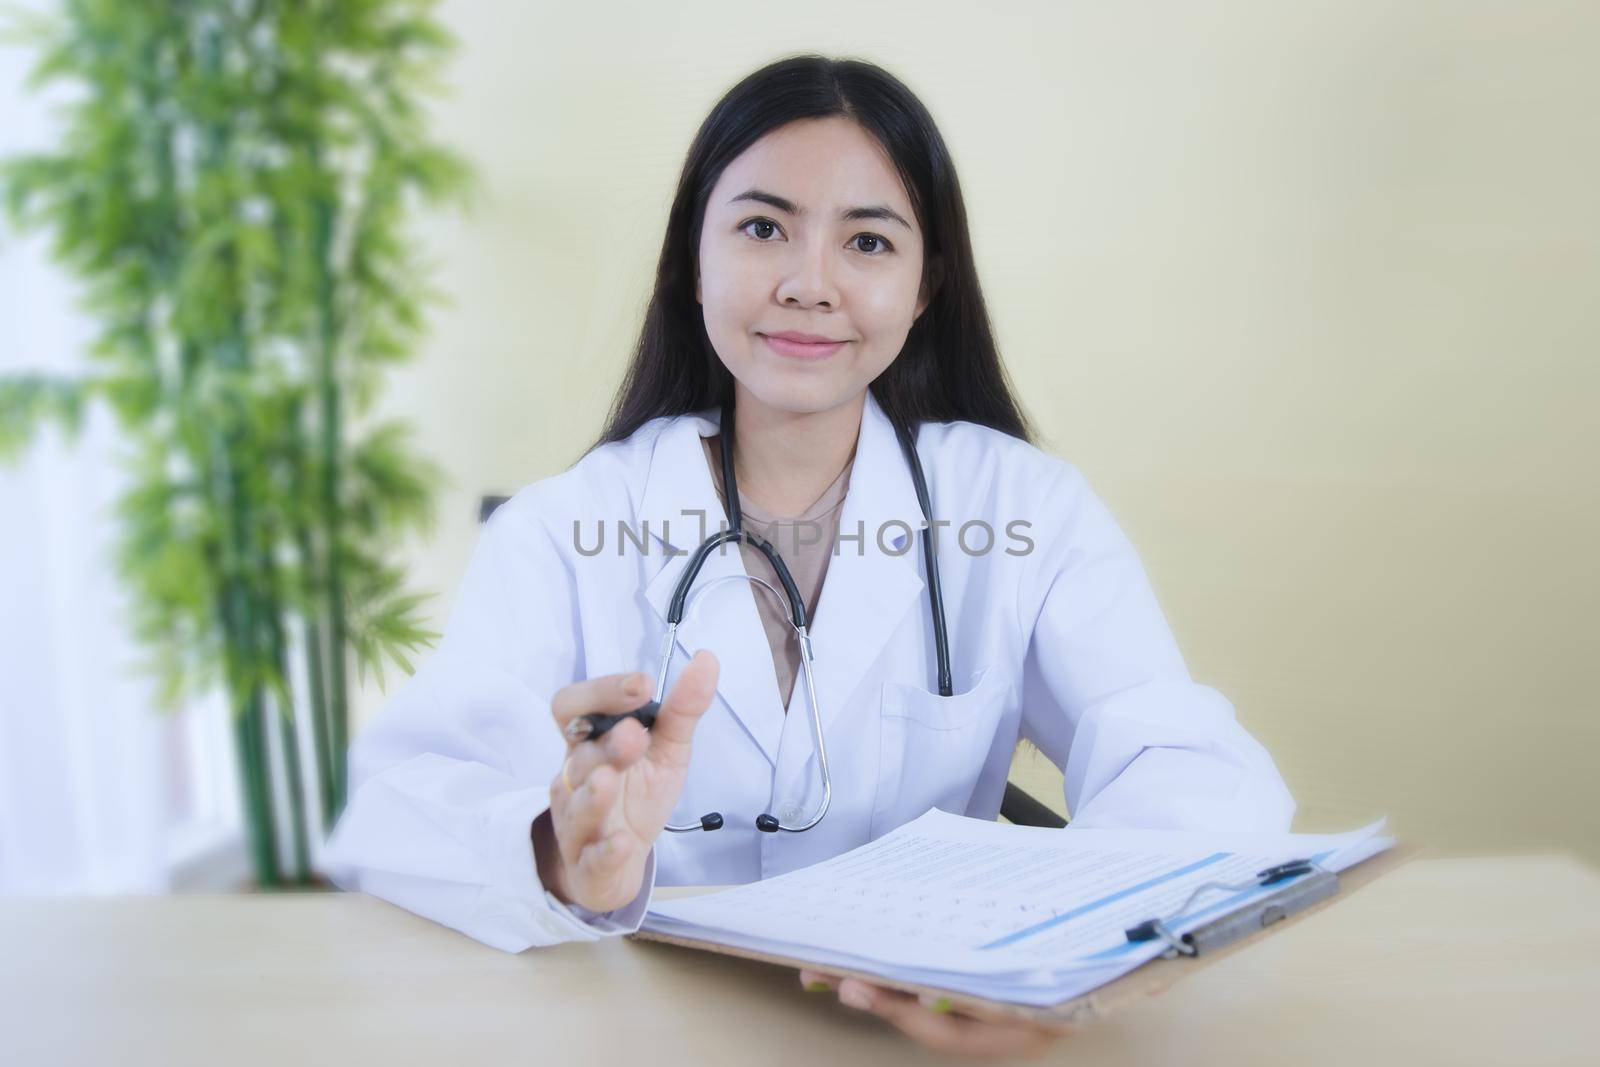 Woman is psychologist wearing white coat with stethoscope looking at camera, doctor make video conference interact through internet talk with patient provide help online counseling and therapy concept